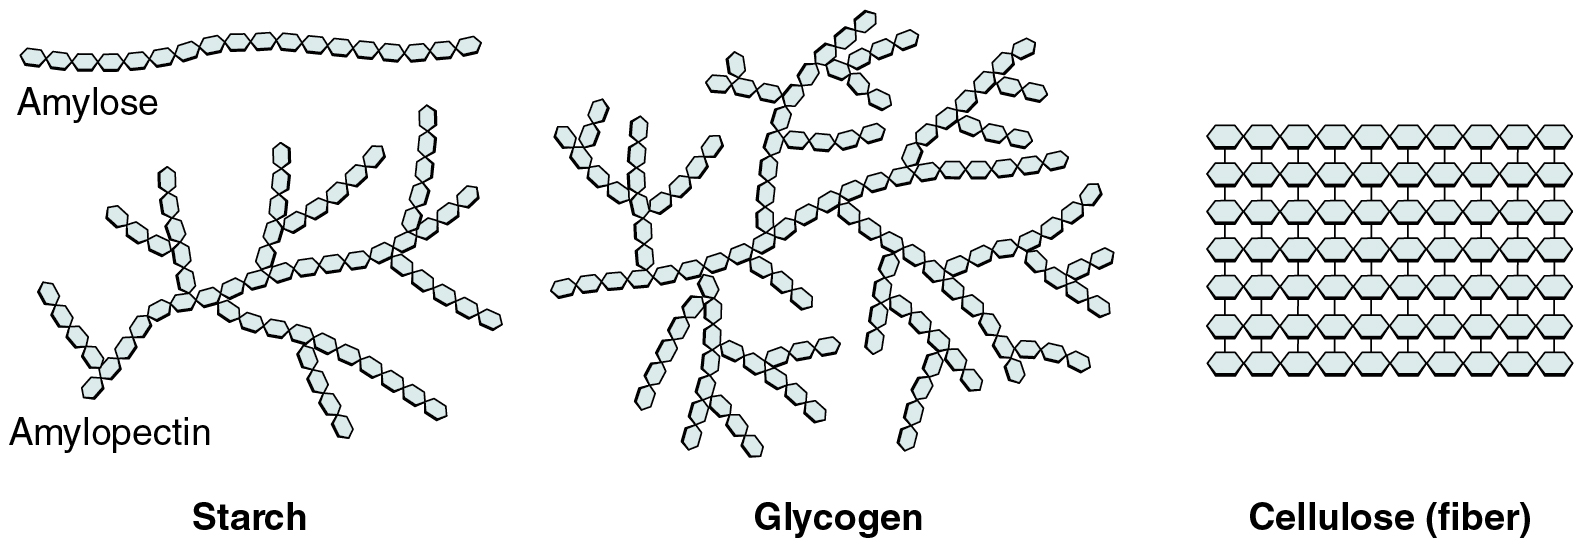 Image shows molecules of starch, glycogen and cellulose.